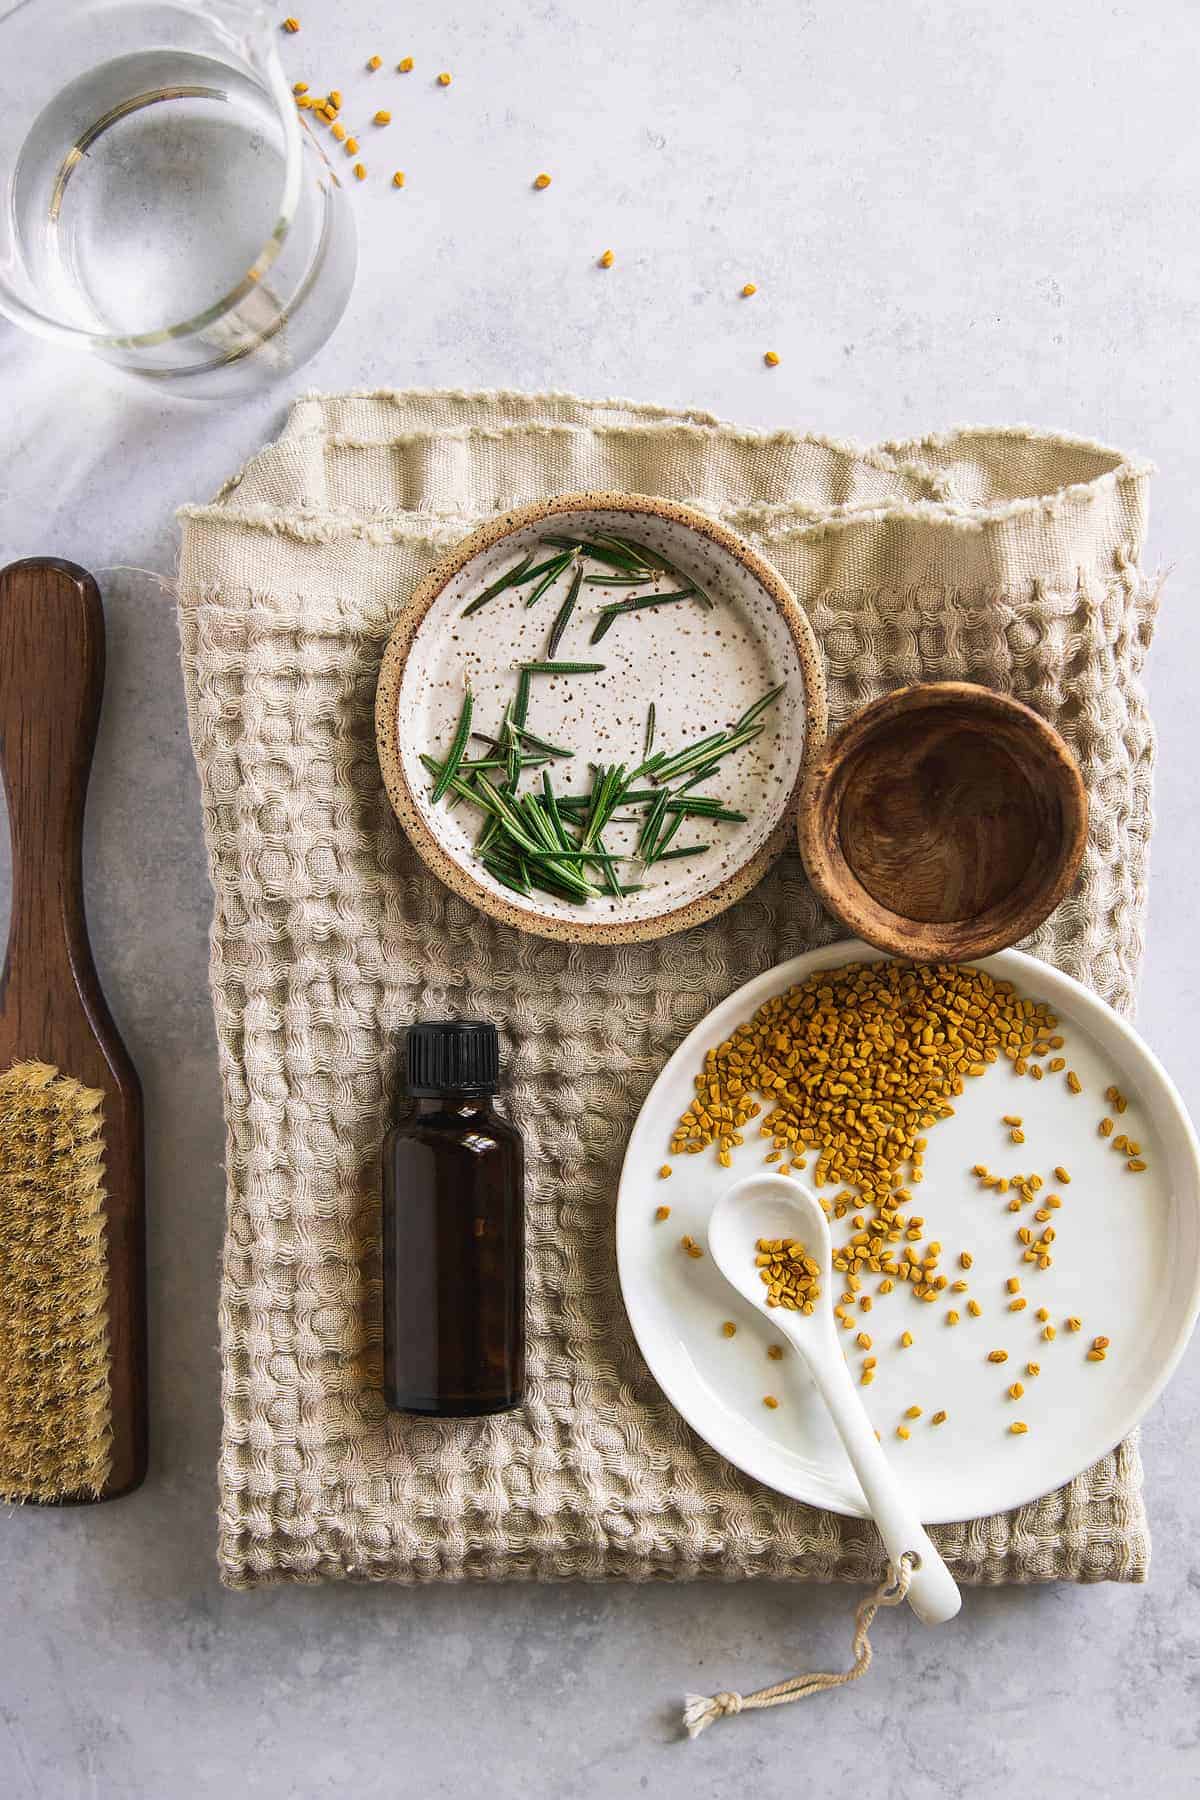 Ingredients for Hair Growth Scalp Serum with rosemary and fenugreek